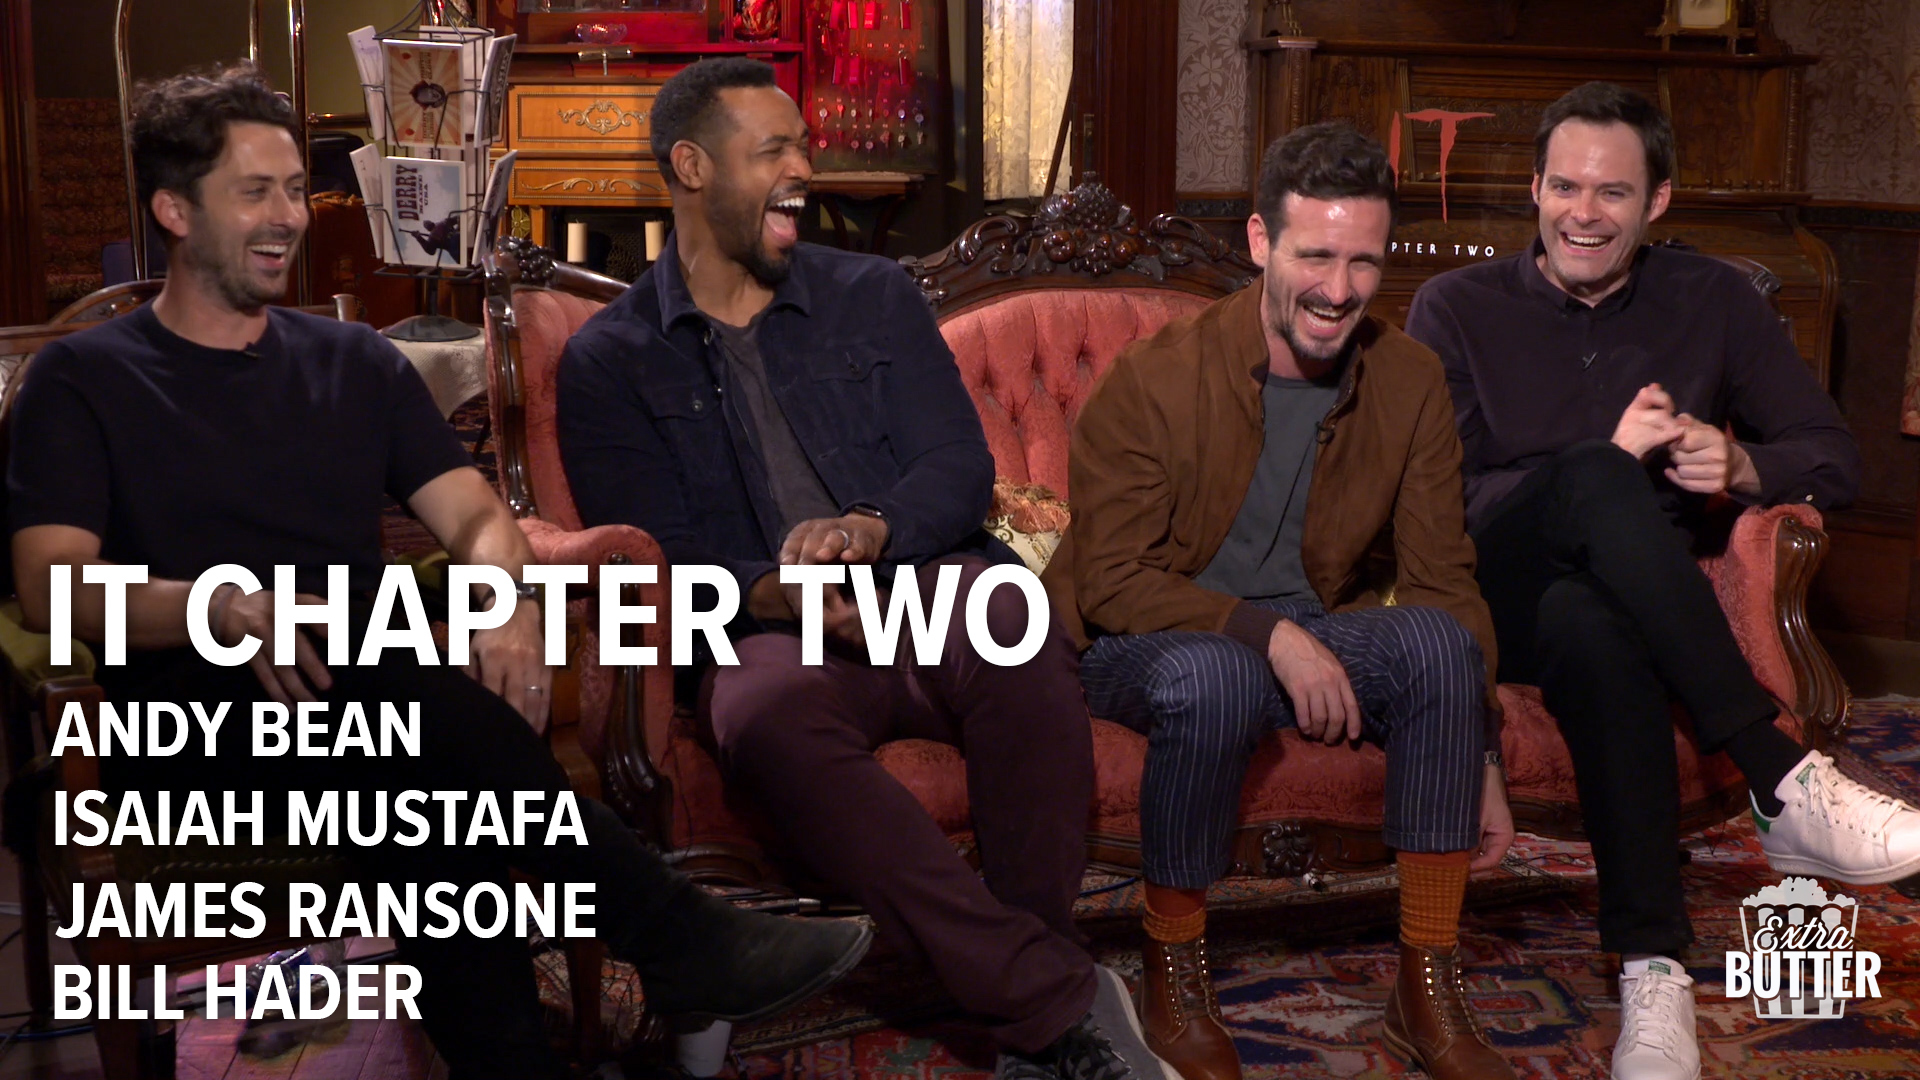 Bill Hader is tired of talking about IT Chapter Two in this very funny interview for the movie. Hader is joined by Andy Bean, Isaiah Mustafa and James Ransone.